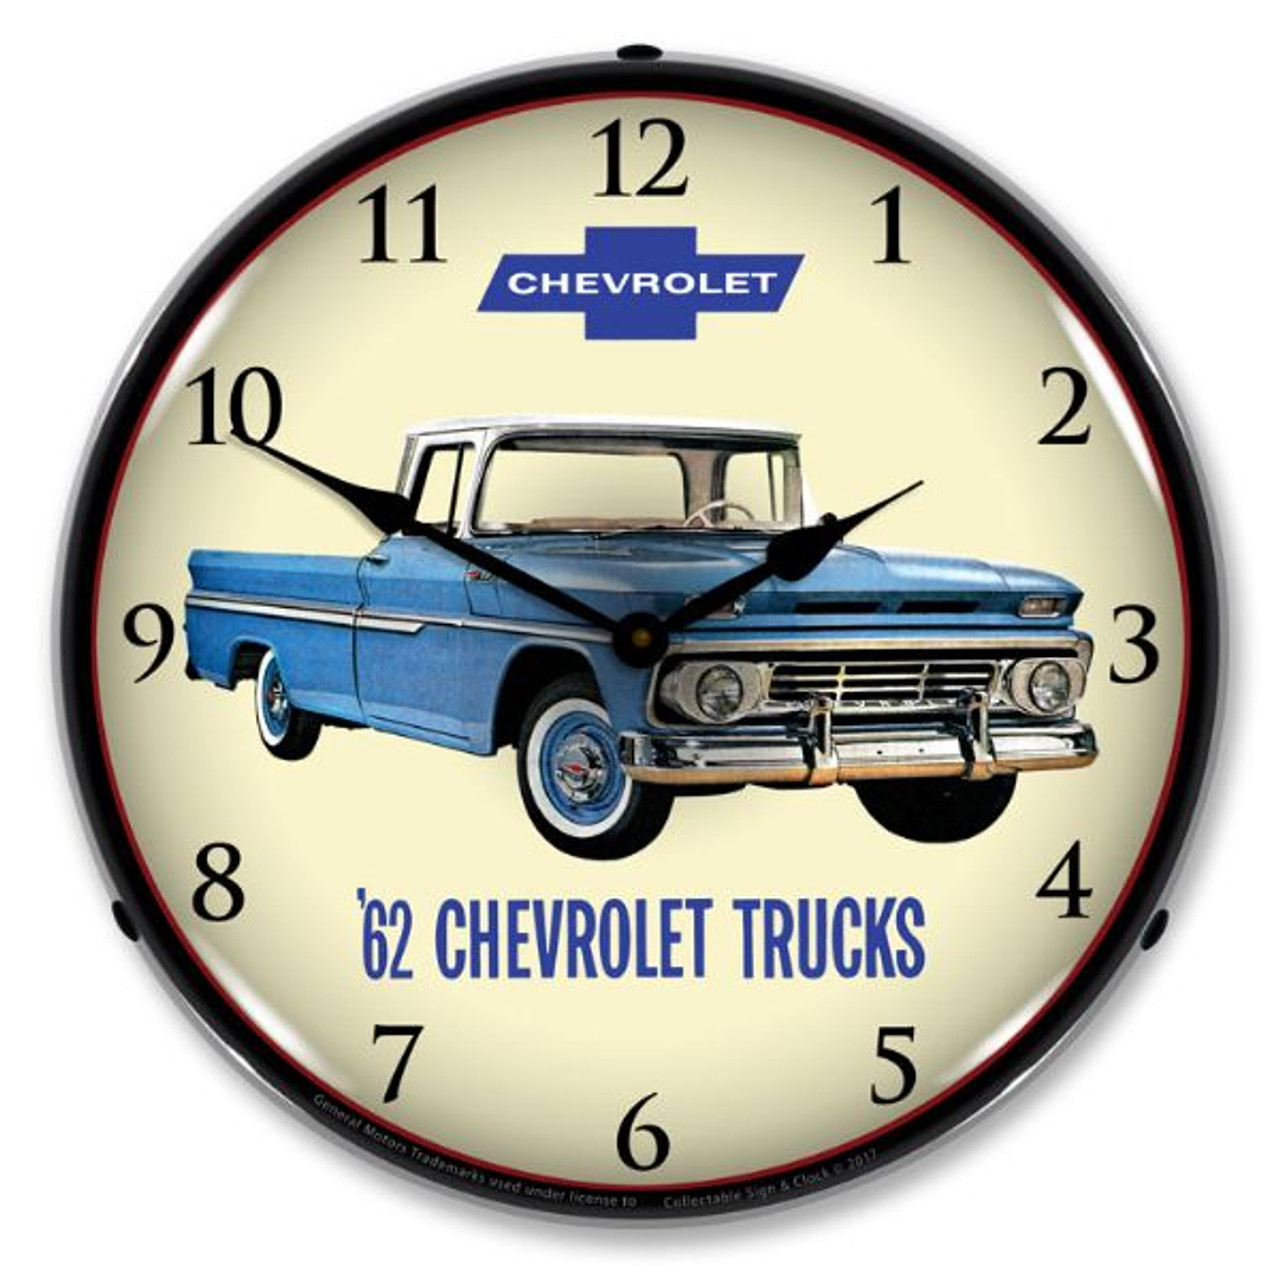 1962 Chevrolet Truck Lighted Wall Clock 14 x 14 Inches